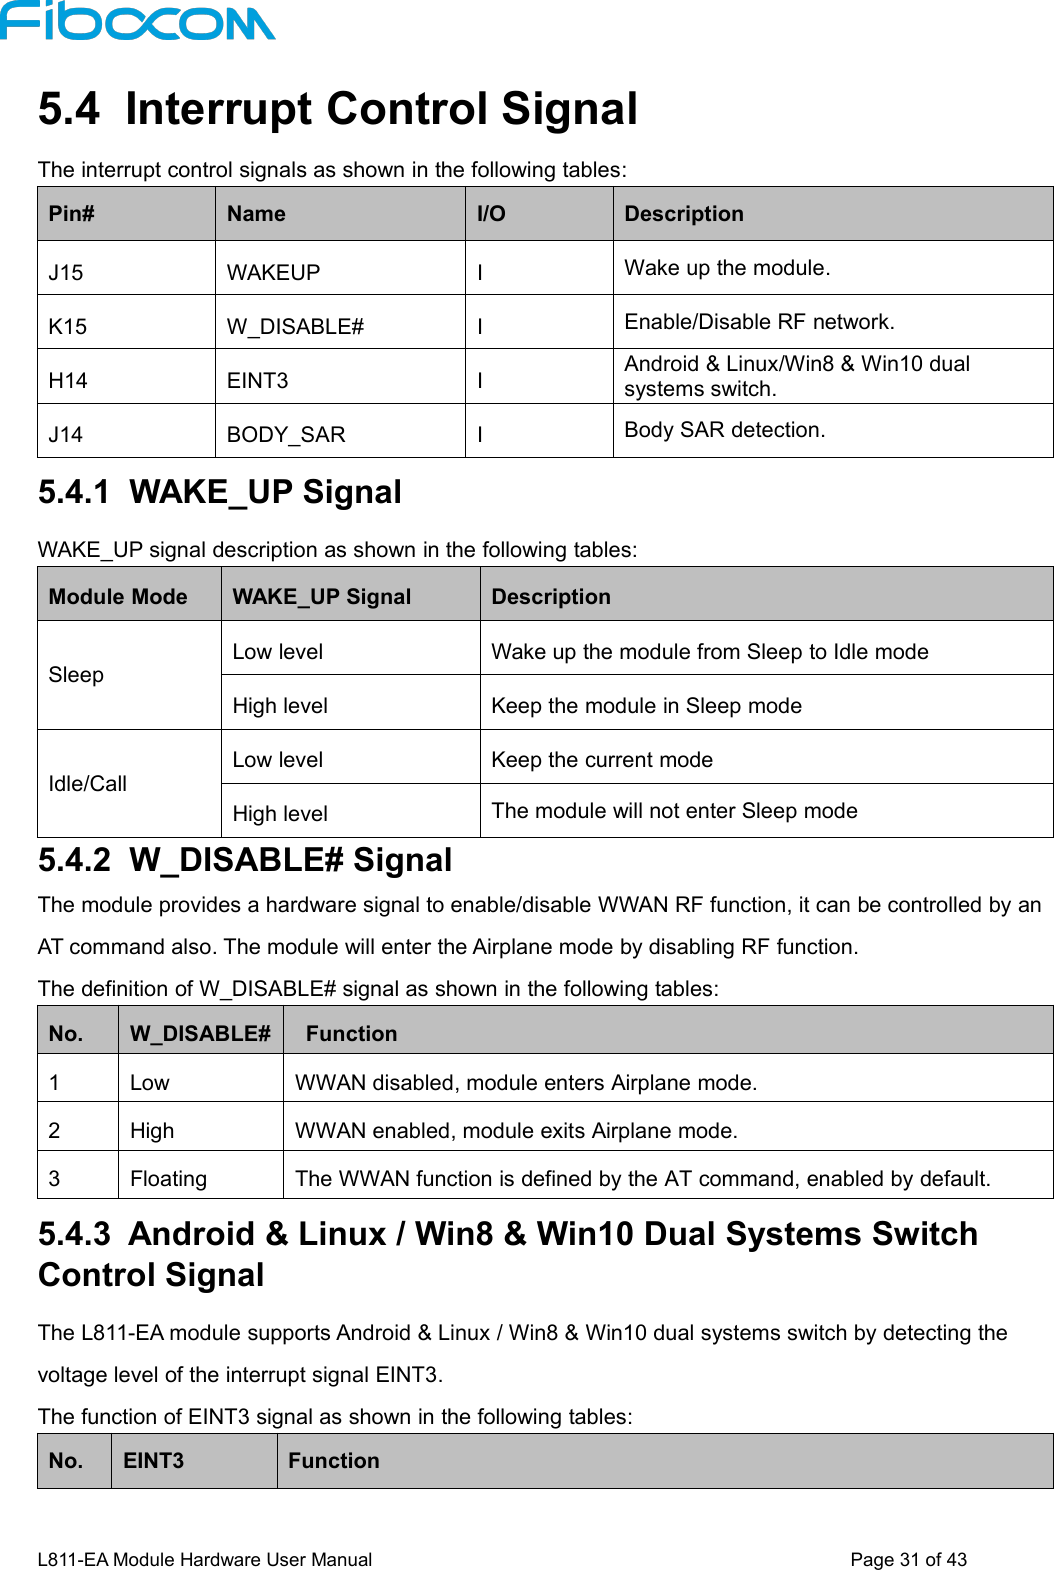 L811-EA Module Hardware User Manual Page31of435.4 Interrupt Control SignalThe interrupt control signals as shown in the following tables:Pin#NameI/ODescriptionJ15WAKEUPIWake up the module.K15W_DISABLE#IEnable/Disable RF network.H14EINT3IAndroid &amp; Linux/Win8 &amp; Win10 dualsystems switch.J14BODY_SARIBody SAR detection.5.4.1 WAKE_UP SignalWAKE_UP signal description as shown in the following tables:Module ModeWAKE_UP SignalDescriptionSleepLow levelWake up the module from Sleep to Idle modeHigh levelKeep the module in Sleep modeIdle/CallLow levelKeep the current modeHigh levelThe module will not enter Sleep mode5.4.2 W_DISABLE# SignalThe module provides a hardware signal to enable/disable WWAN RF function, it can be controlled by anAT command also. The module will enter the Airplane mode by disabling RF function.The definition of W_DISABLE# signal as shown in the following tables:5.4.3 Android &amp; Linux / Win8 &amp; Win10 Dual Systems SwitchControl SignalThe L811-EA module supports Android &amp; Linux / Win8 &amp; Win10 dual systems switch by detecting thevoltage level of the interrupt signal EINT3.The function of EINT3 signal as shown in the following tables:No.EINT3FunctionNo.W_DISABLE#Function1LowWWAN disabled, module enters Airplane mode.2HighWWAN enabled, module exits Airplane mode.3FloatingThe WWAN function is defined by the AT command, enabled by default.